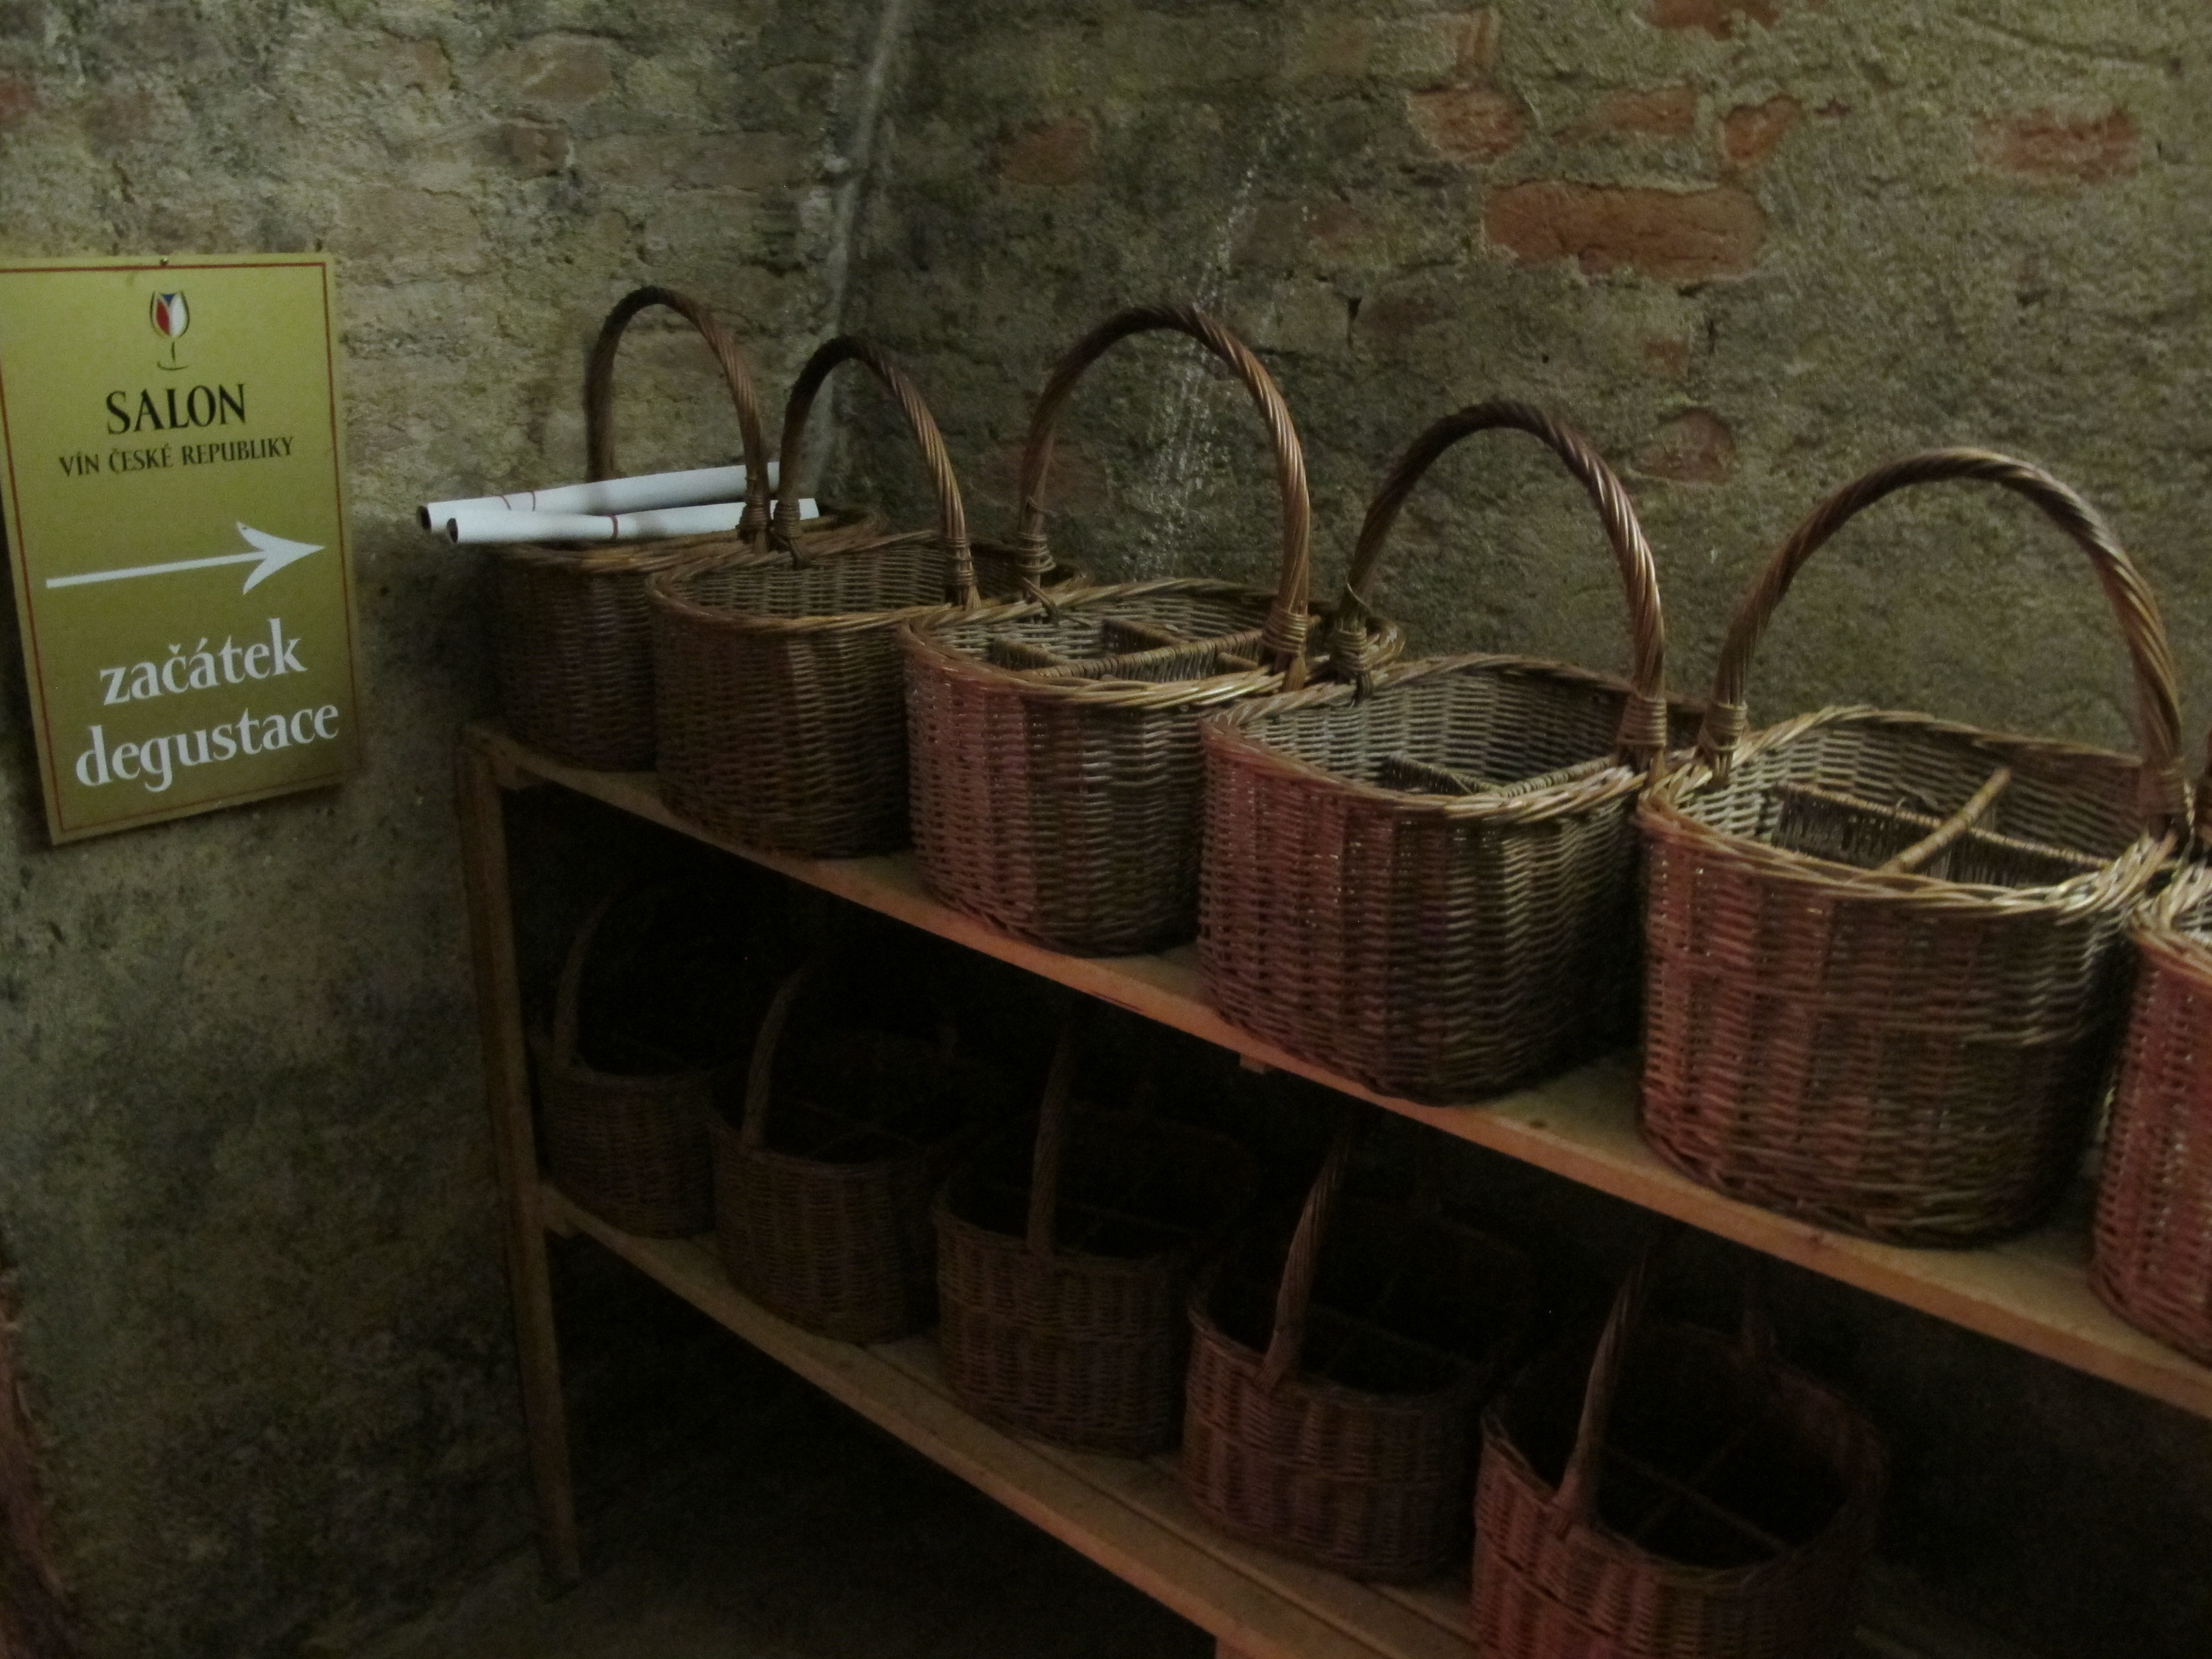 Shopping baskets for your wines